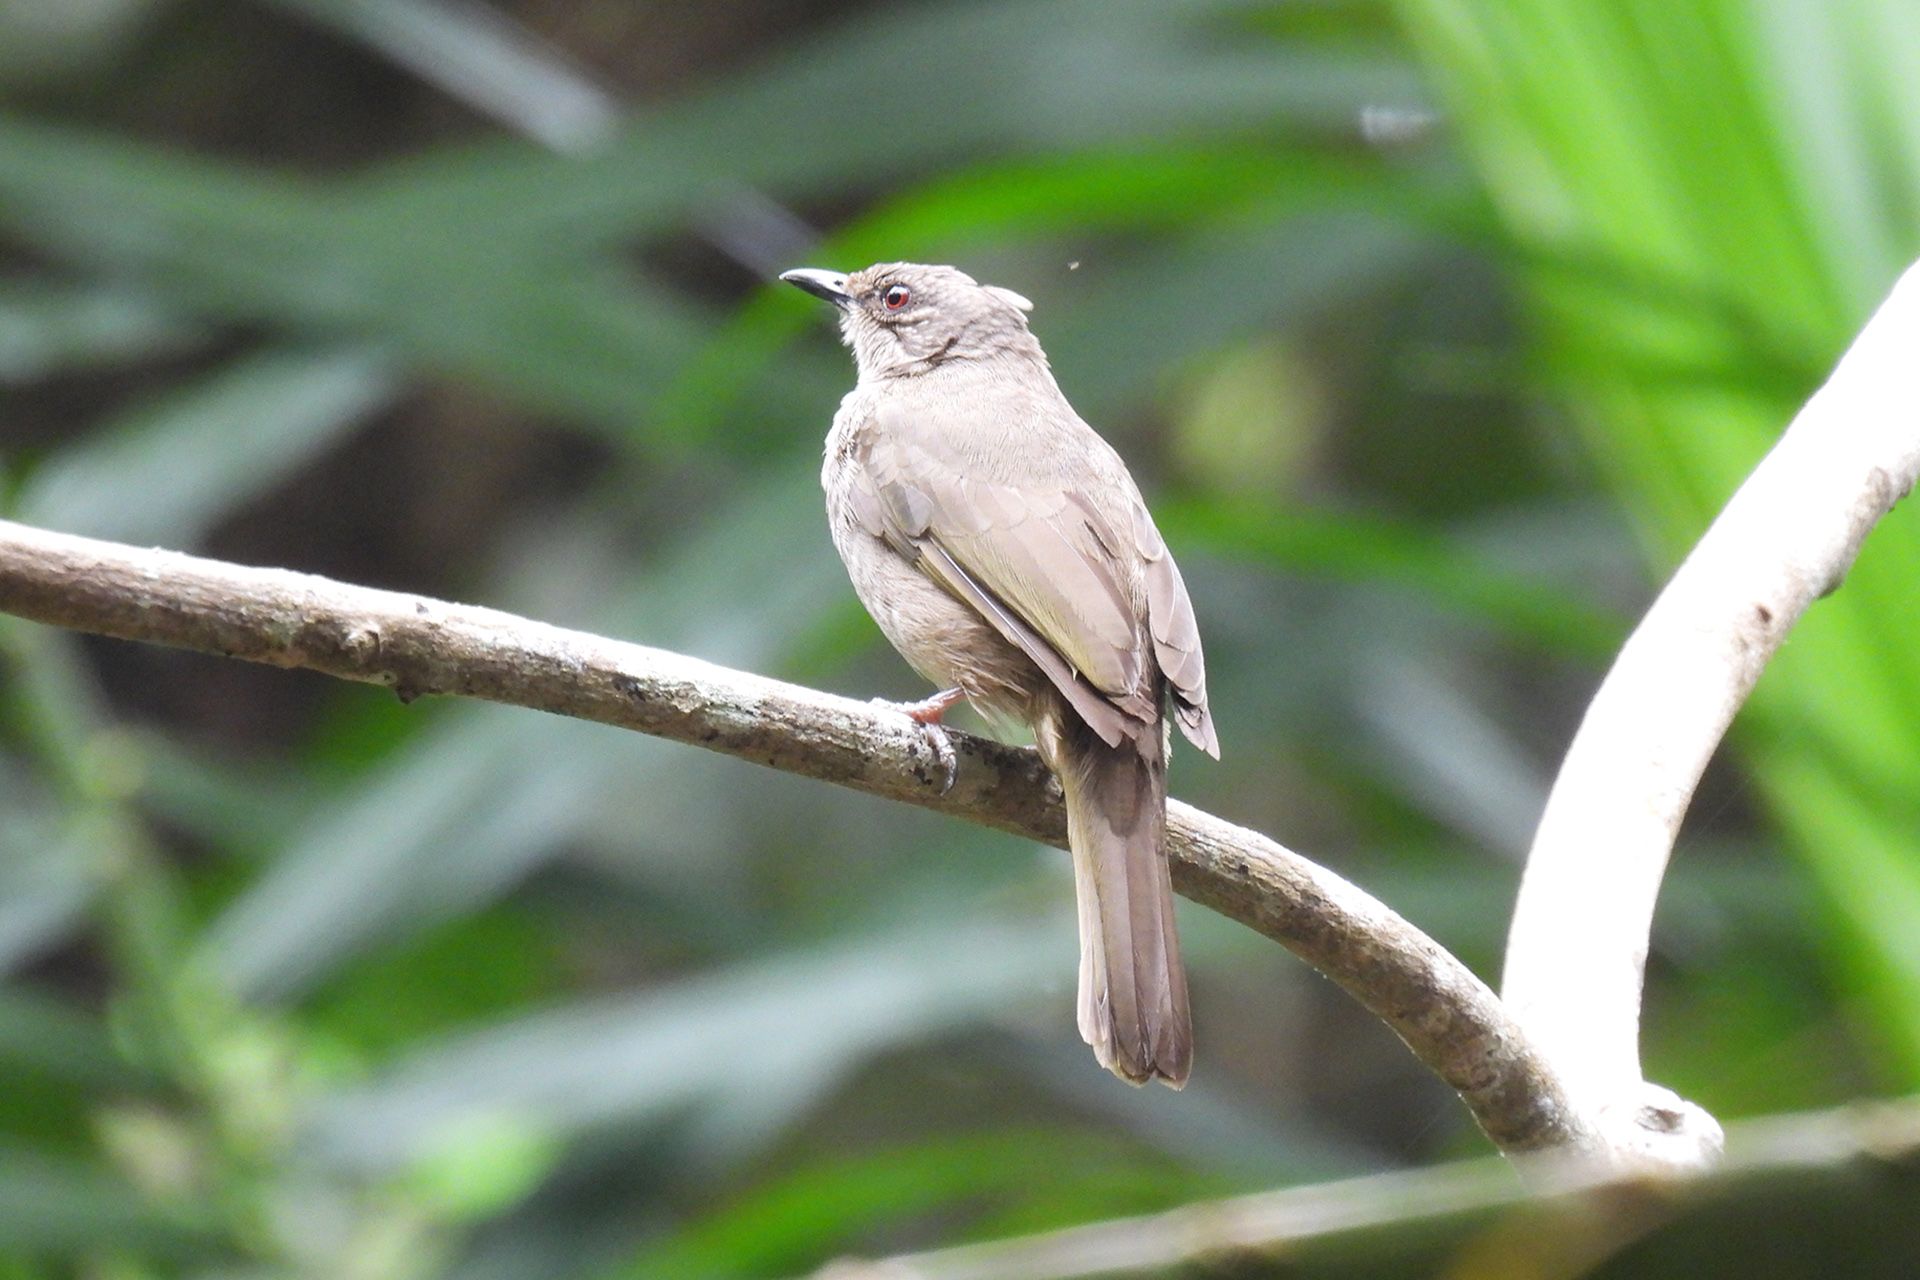 An olive-winged bulbul. These are among the fruit-eating birds that can be found in the Central Catchment Nature Reserve.